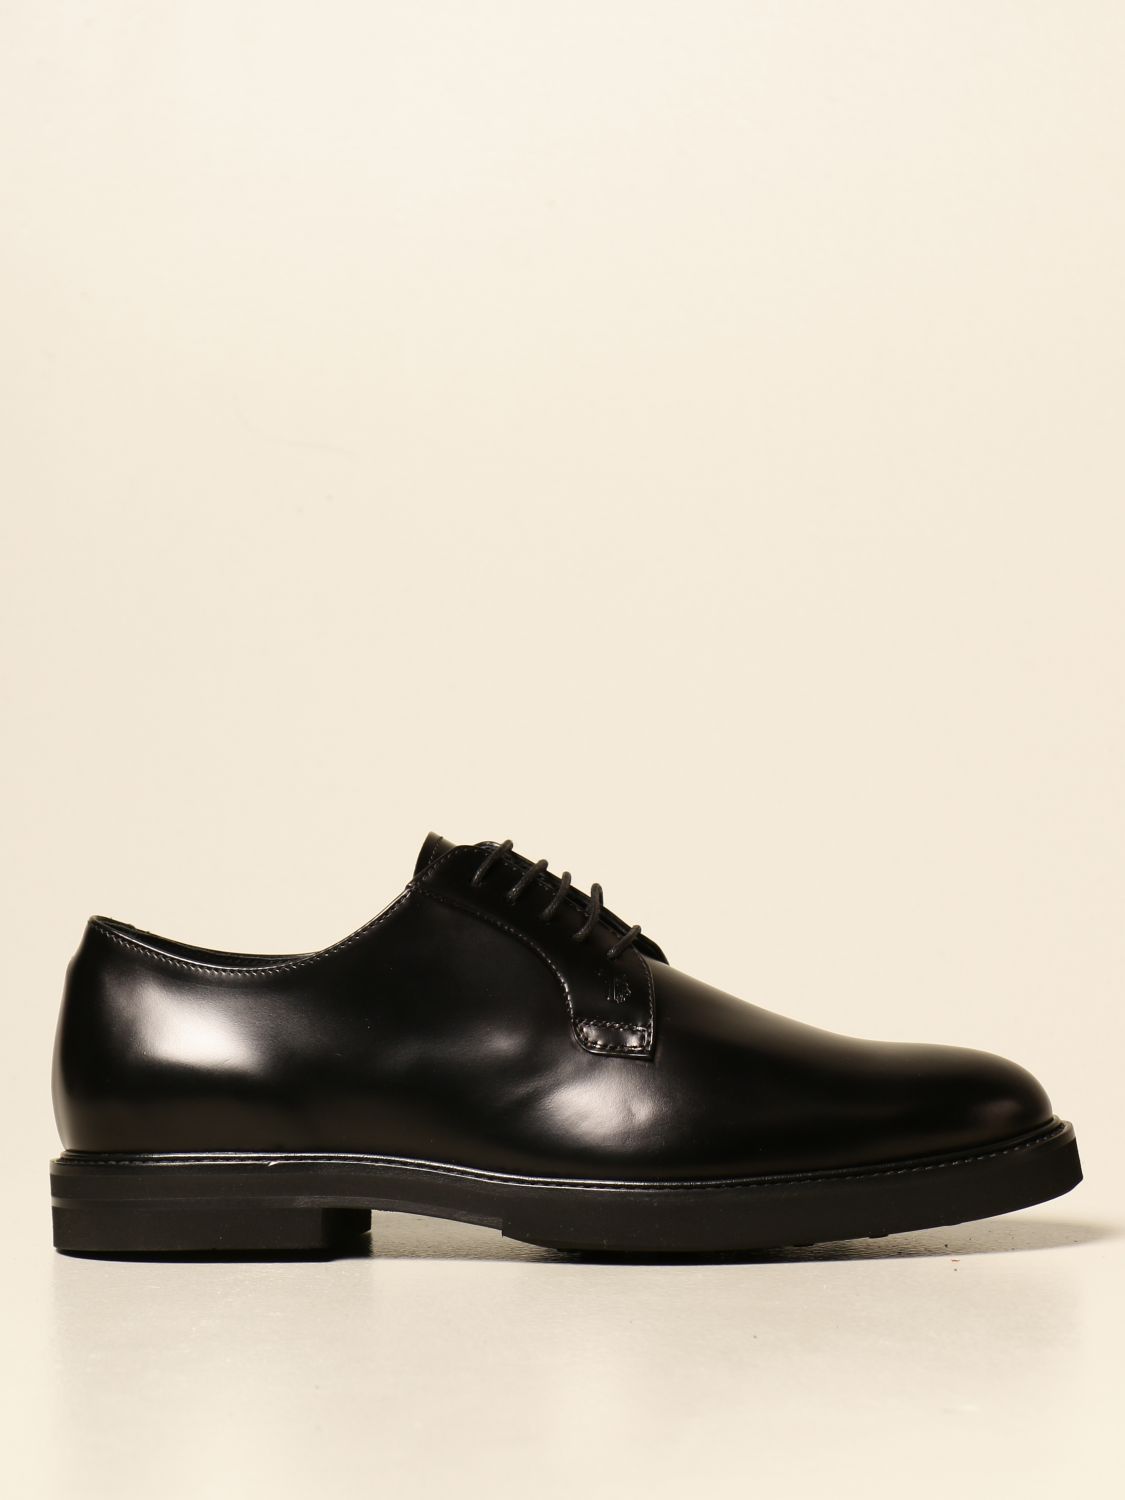 tods shoes black